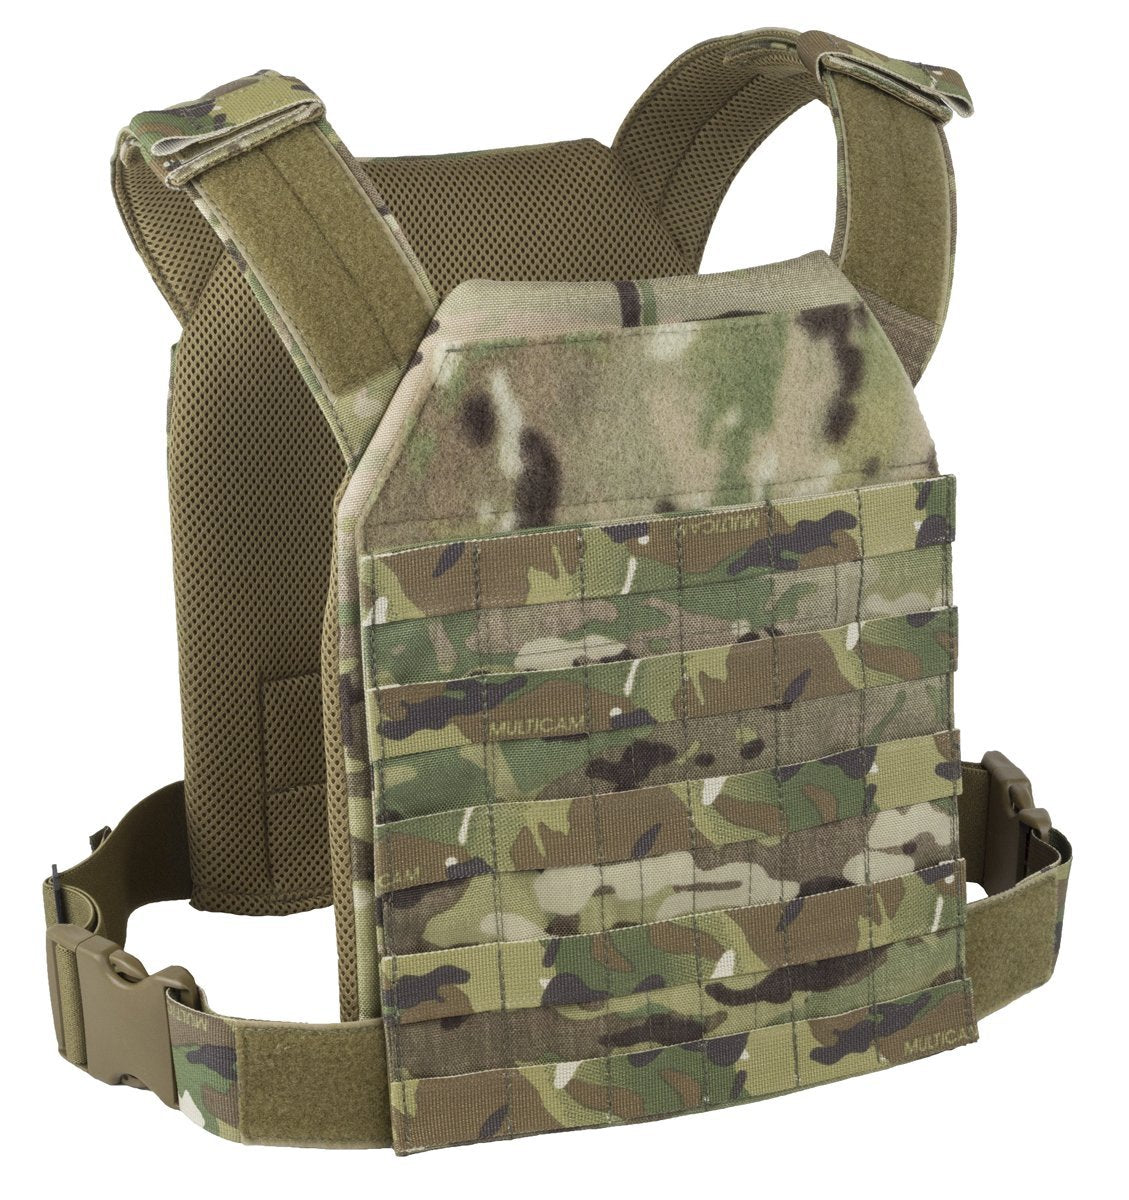 An Elite Survival Systems MOLLE Adaptable Lightweight Plate Carrier on a white background.